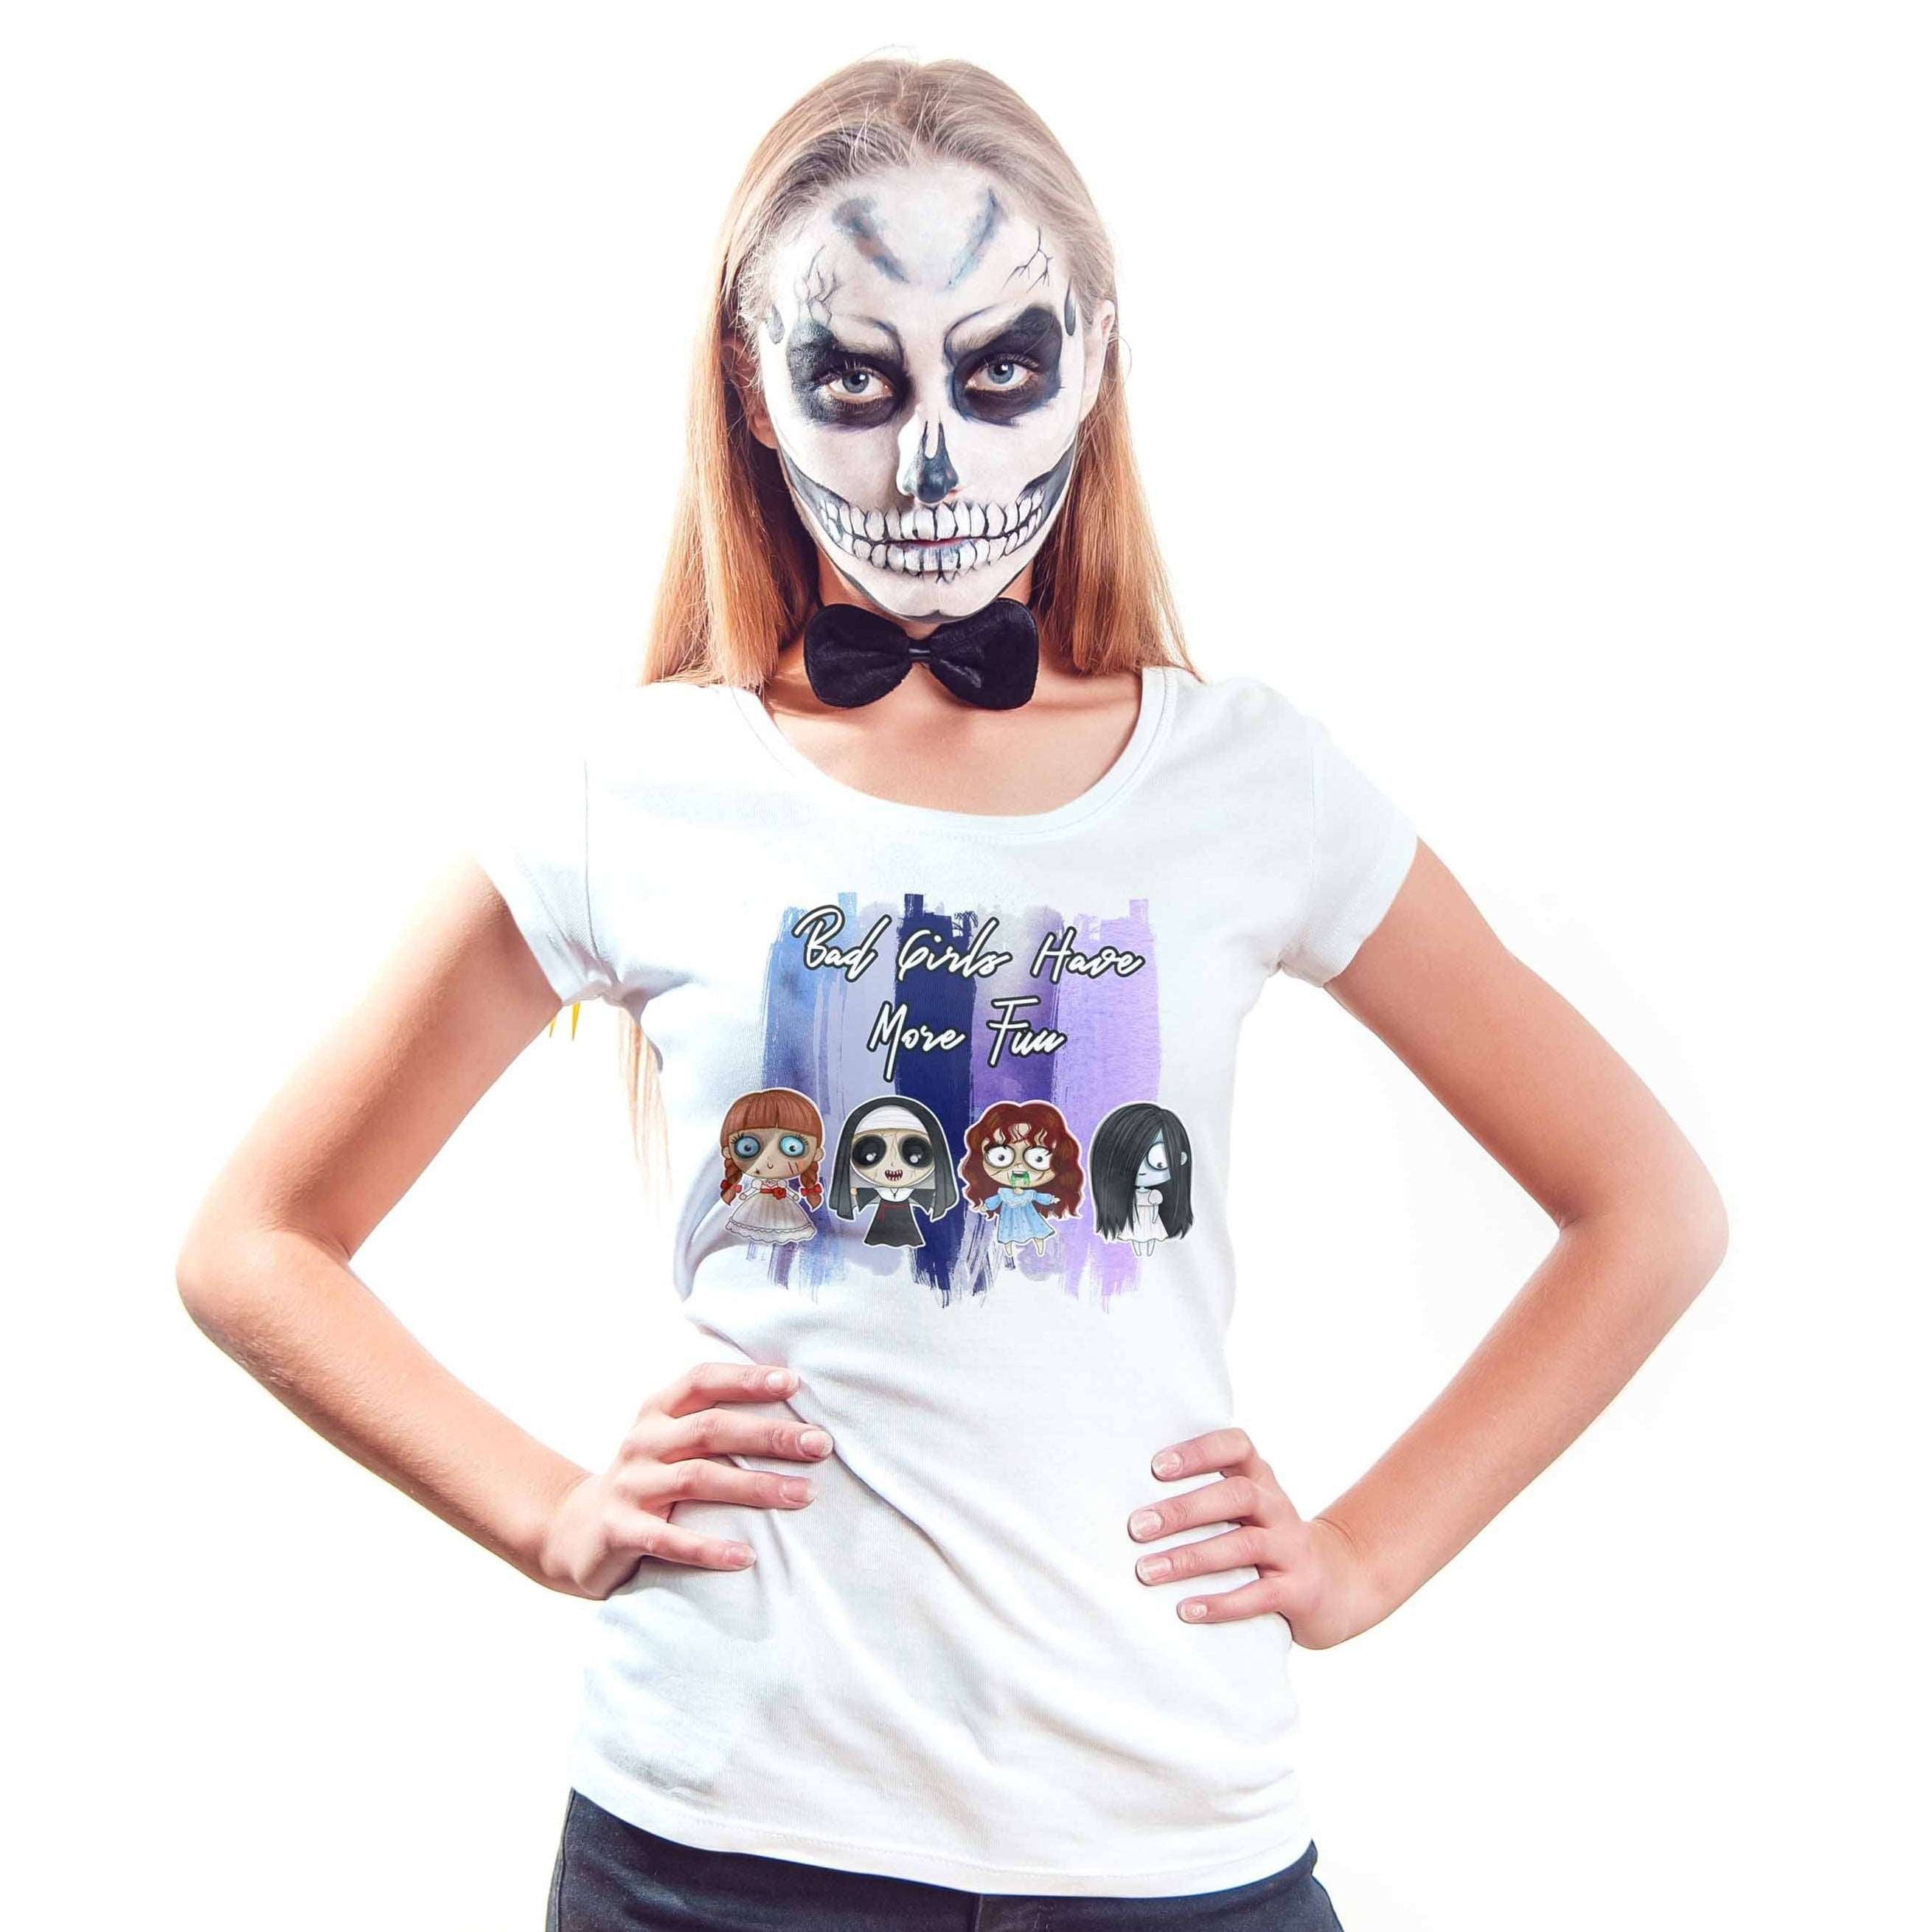 Bad Girls Have More Fun 2 Graphic Tee